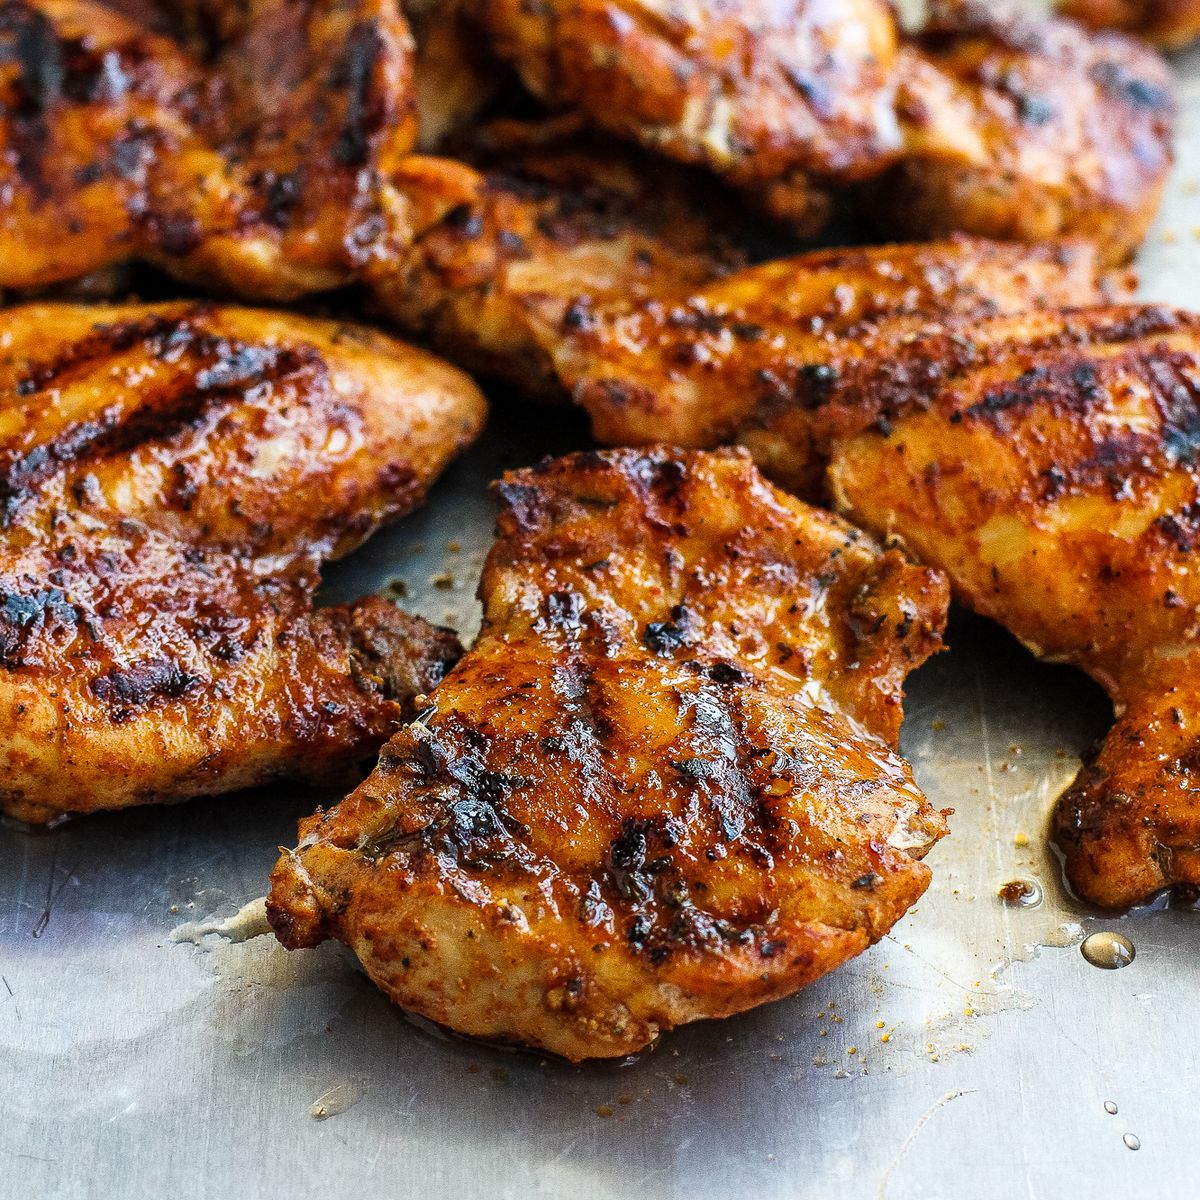 https://hips.hearstapps.com/thepioneerwoman/wp-content/uploads/2016/09/spice-rubbed-grilled-chicken-00.jpg?crop=0.6665xw:1xh;center,top&resize=1200:*